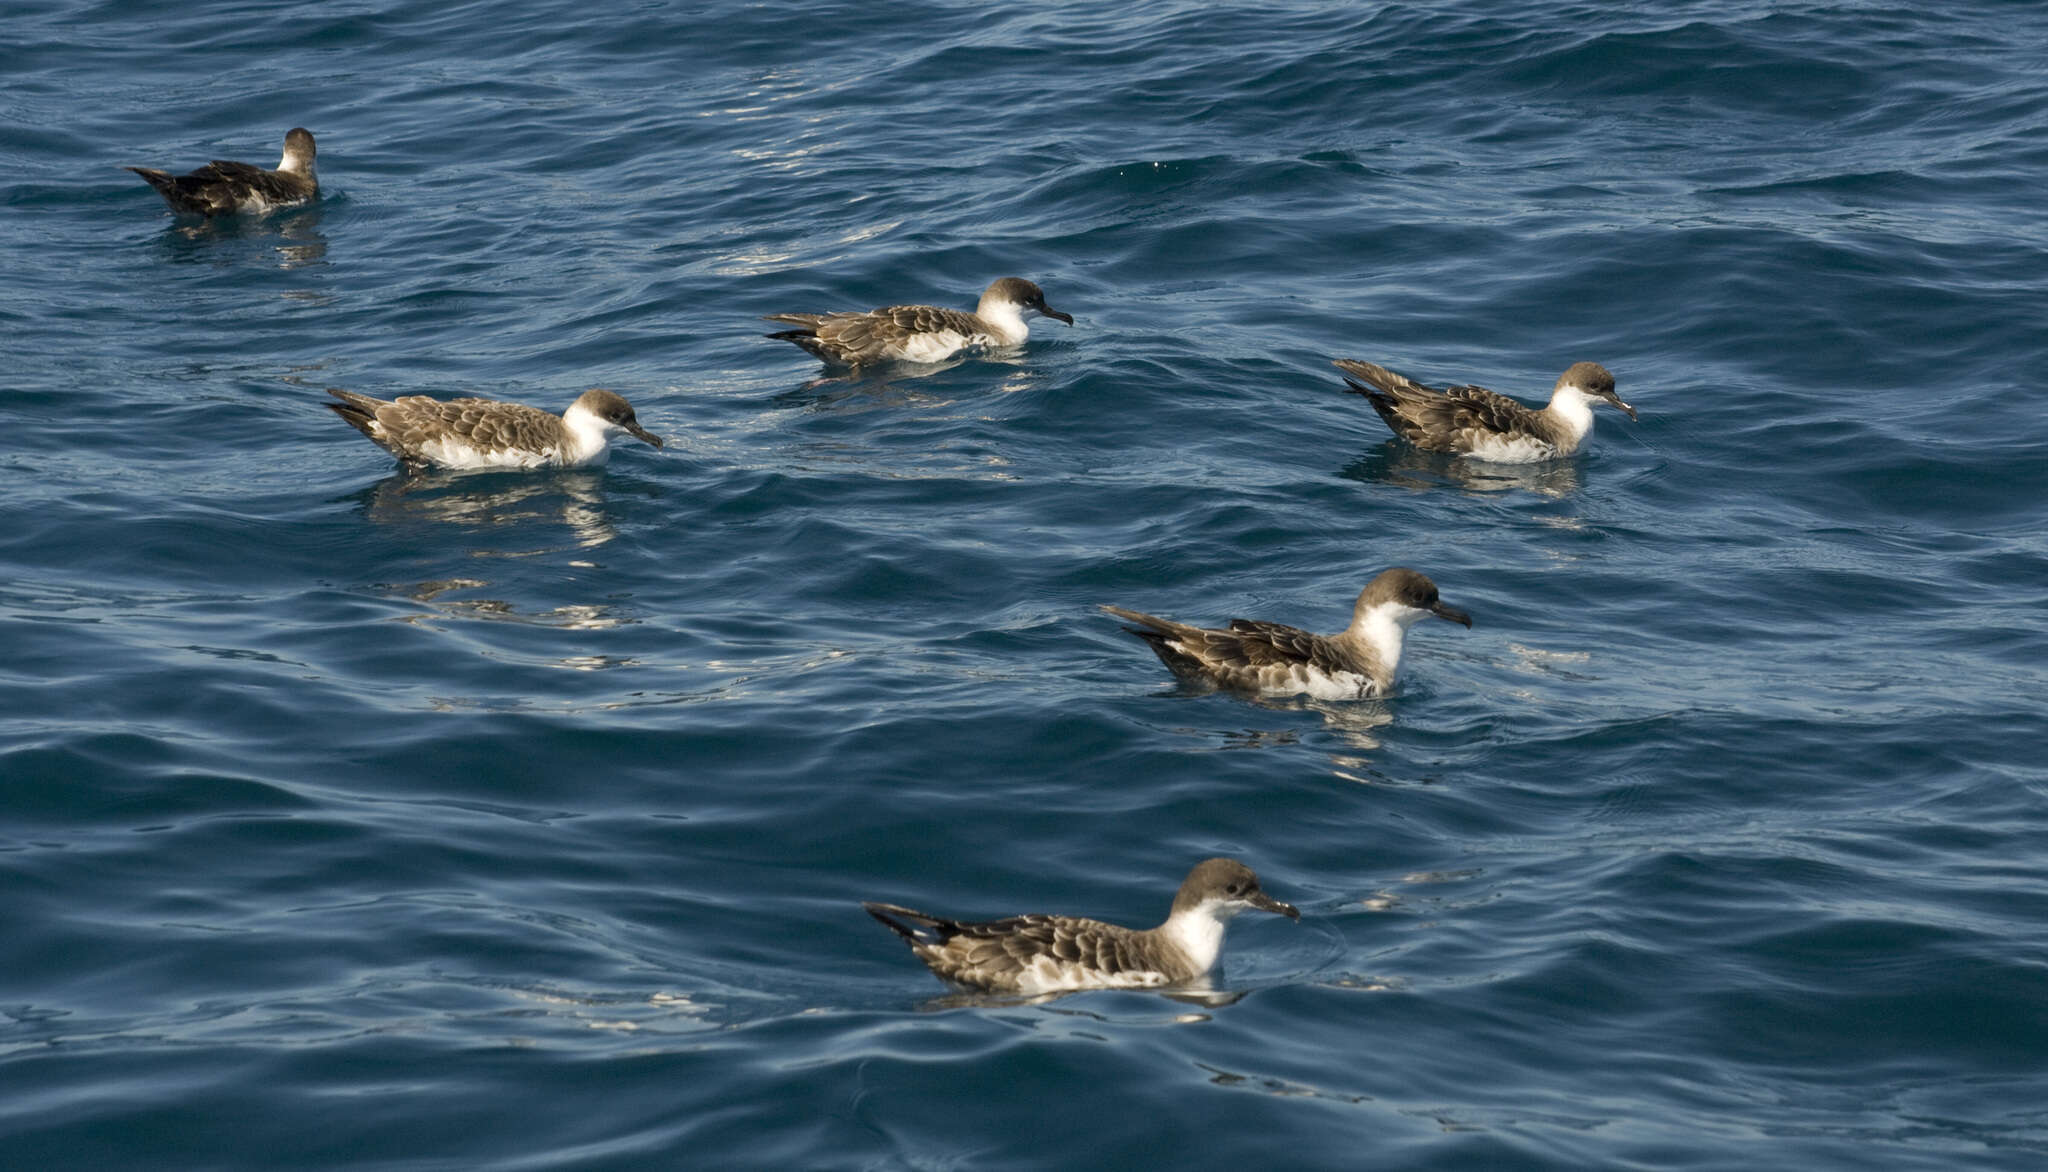 Image of Great Shearwater